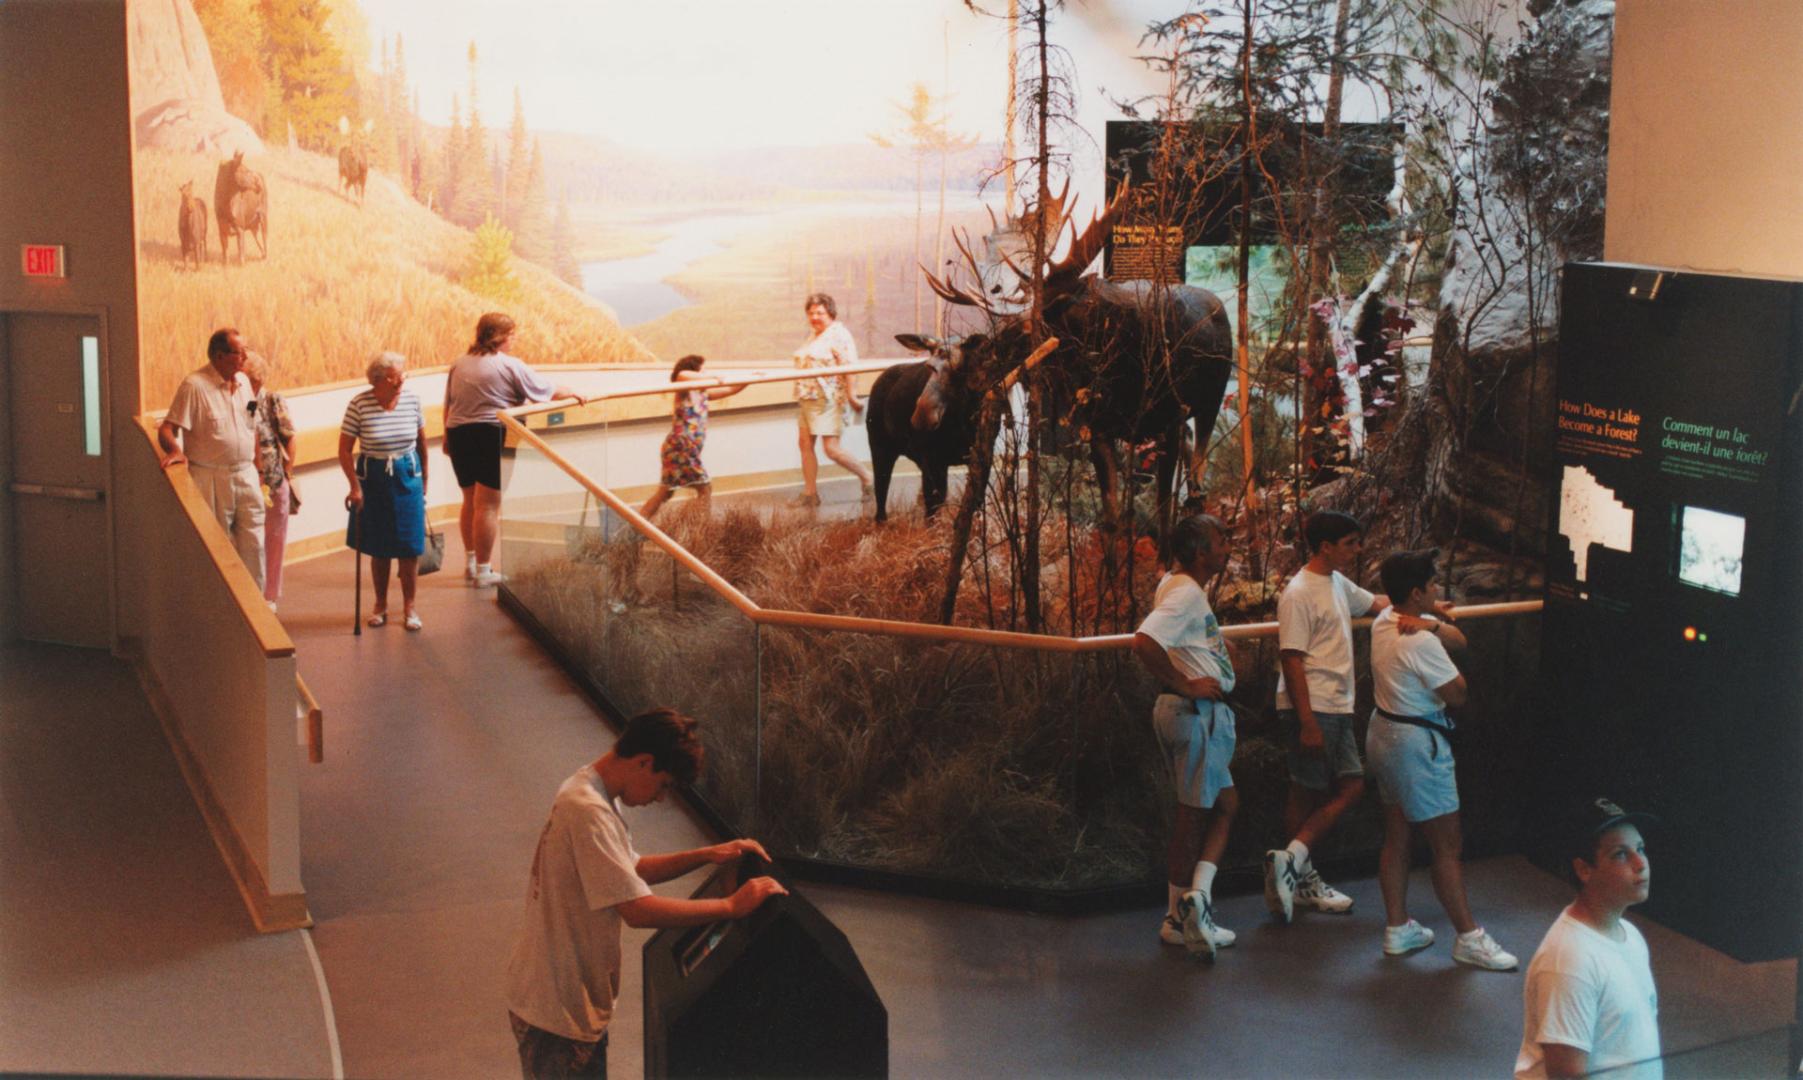 Moose on display at the New Visitors Centre in Algonquin Provincial Park, Ontario